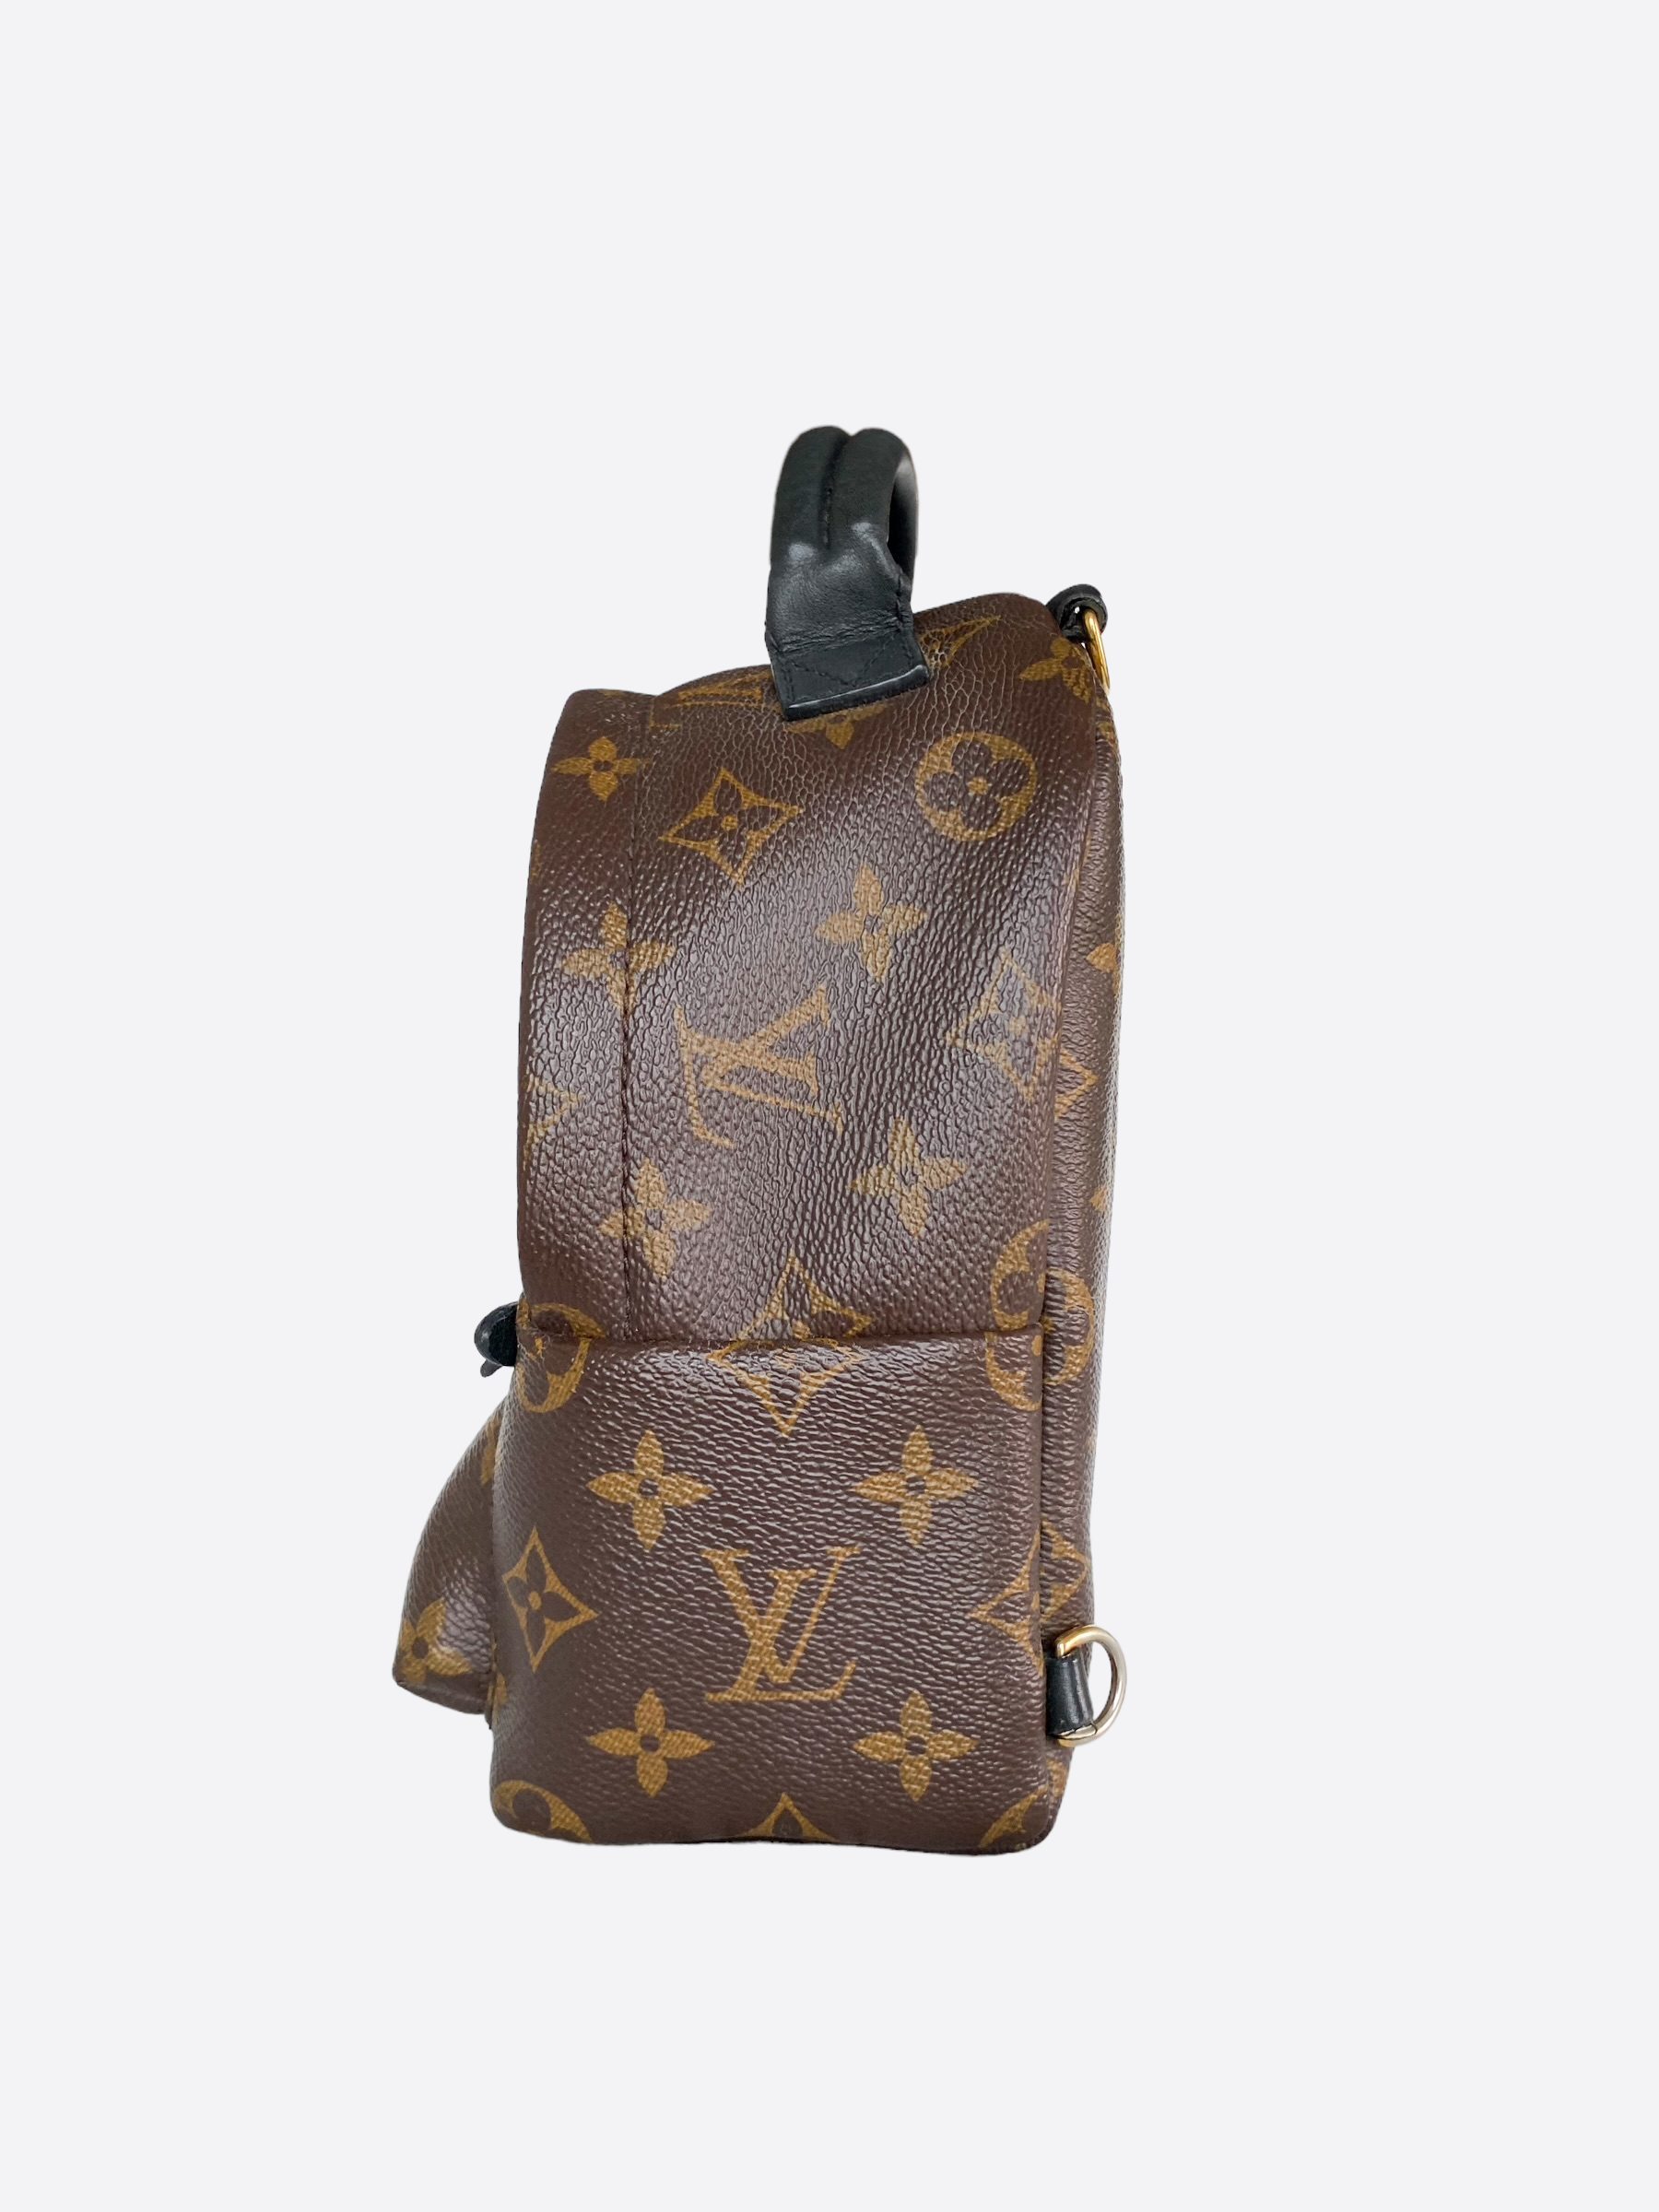 Louis Vuitton Palm Springs Mini Backpack . Condition: 1. 6 Width